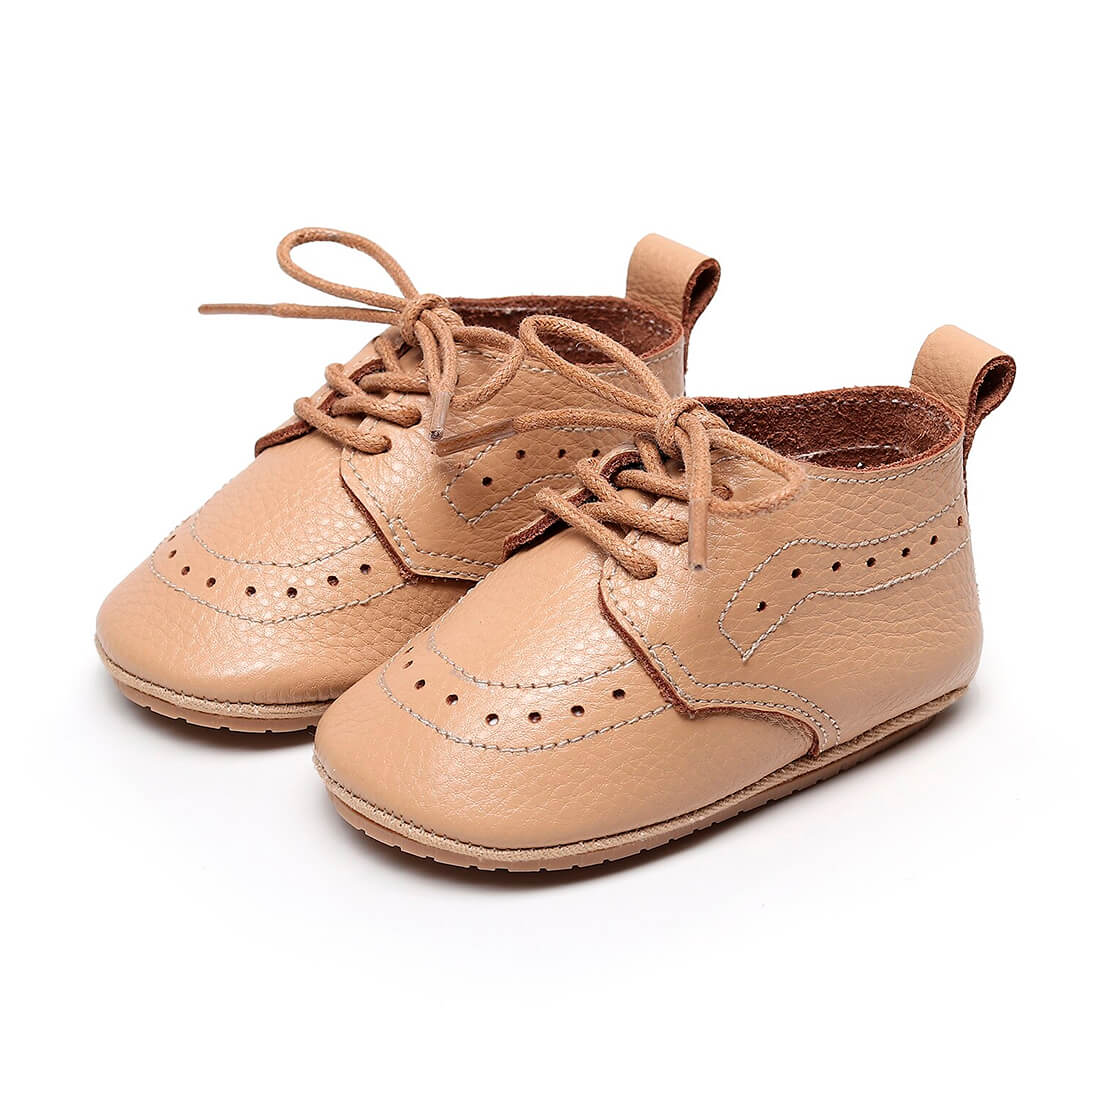 Solid Leather Lace Up Baby Shoes Beige 1 